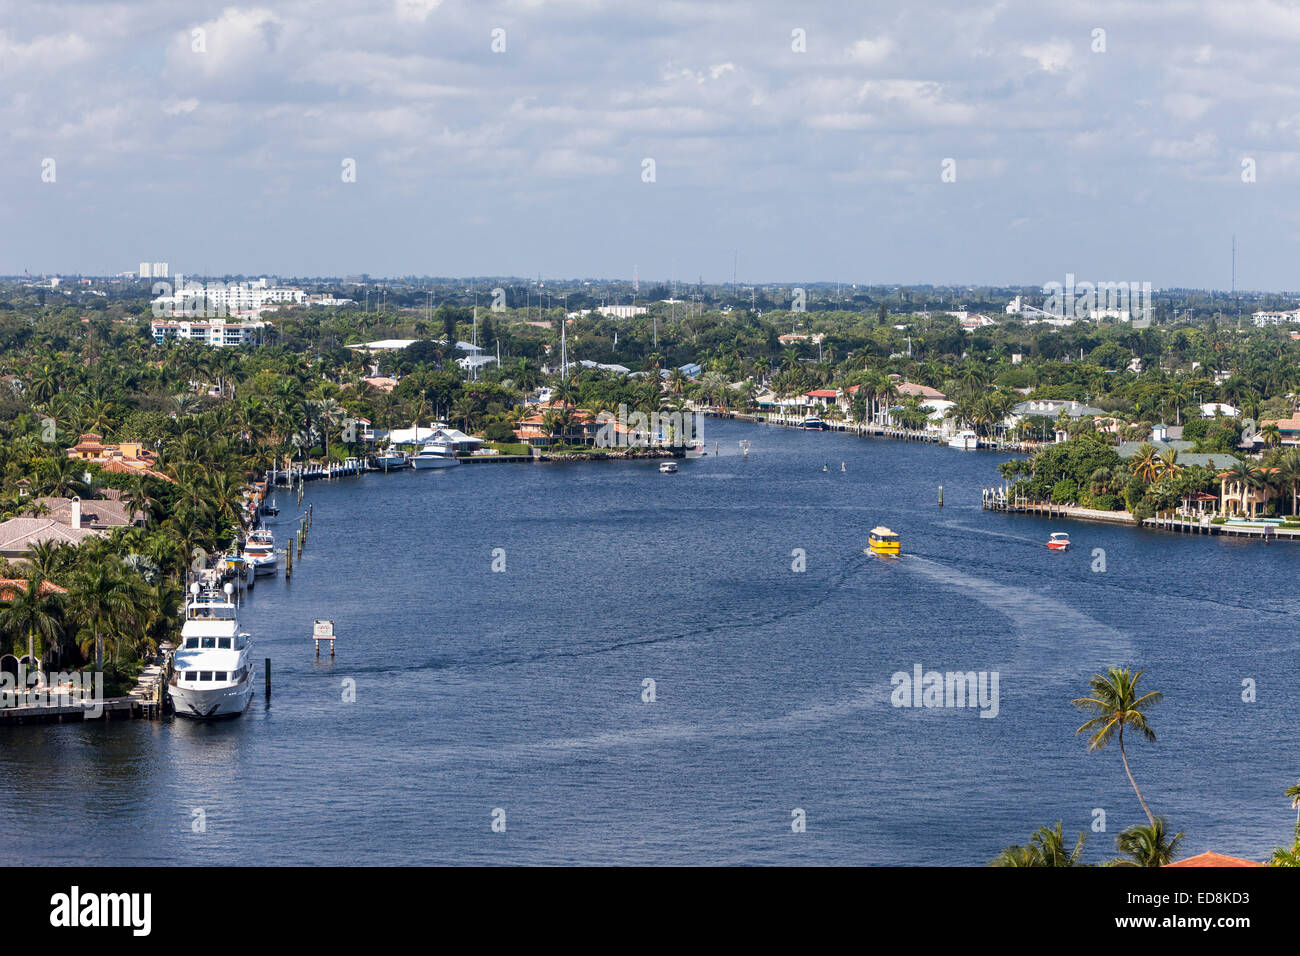 Ft. Lauderdale, Florida. Il Taxi acqueo nell'Intracoastal Waterway. Foto Stock